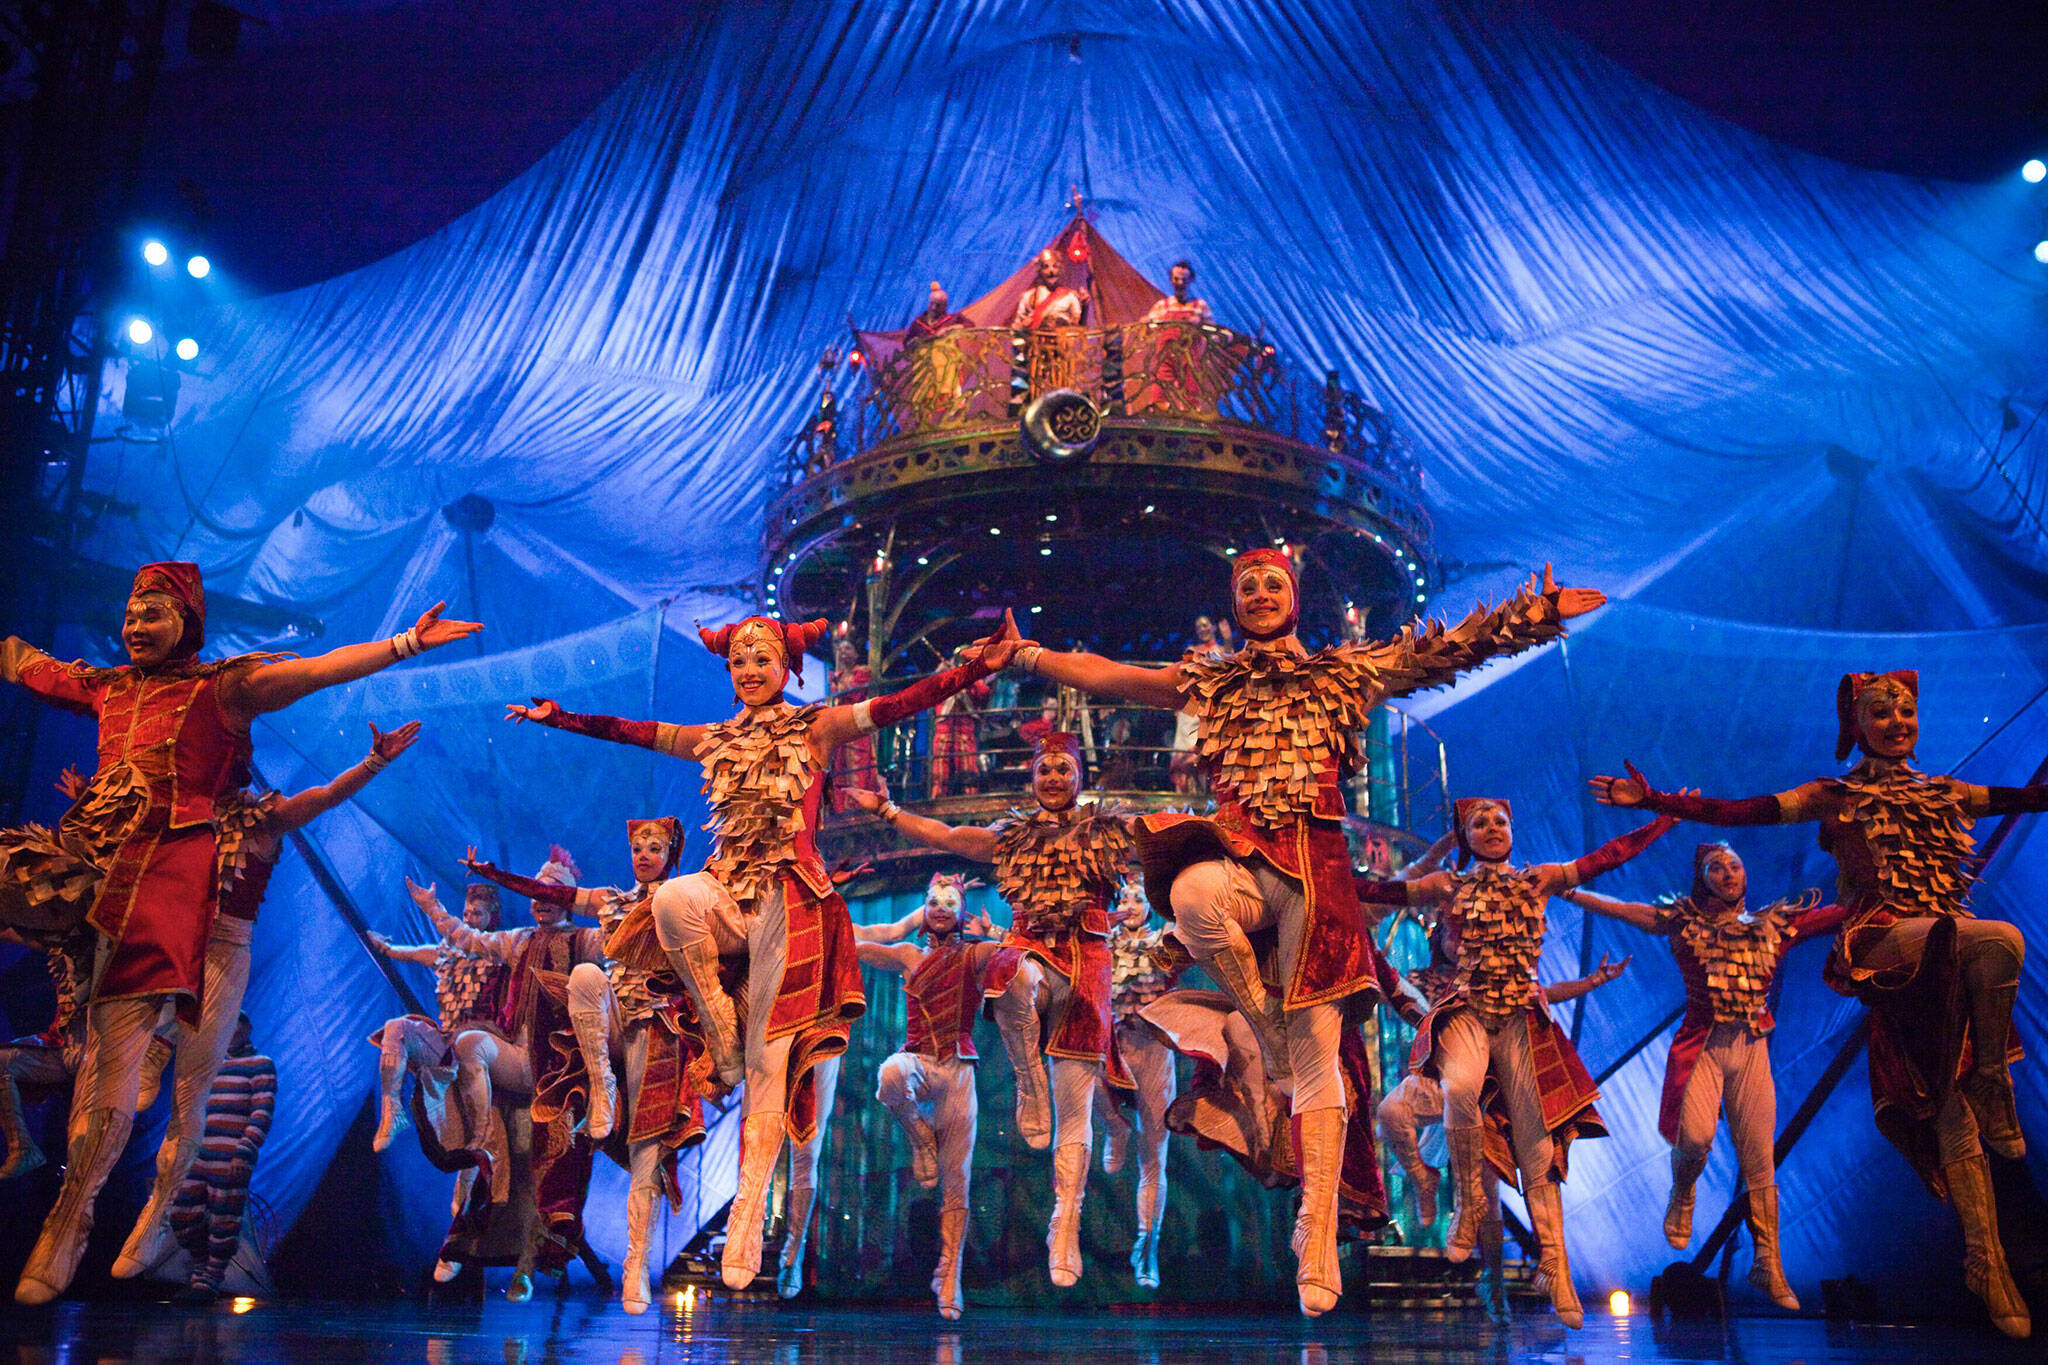 Cirque du Soleil is coming back to Toronto with a huge show at Ontario